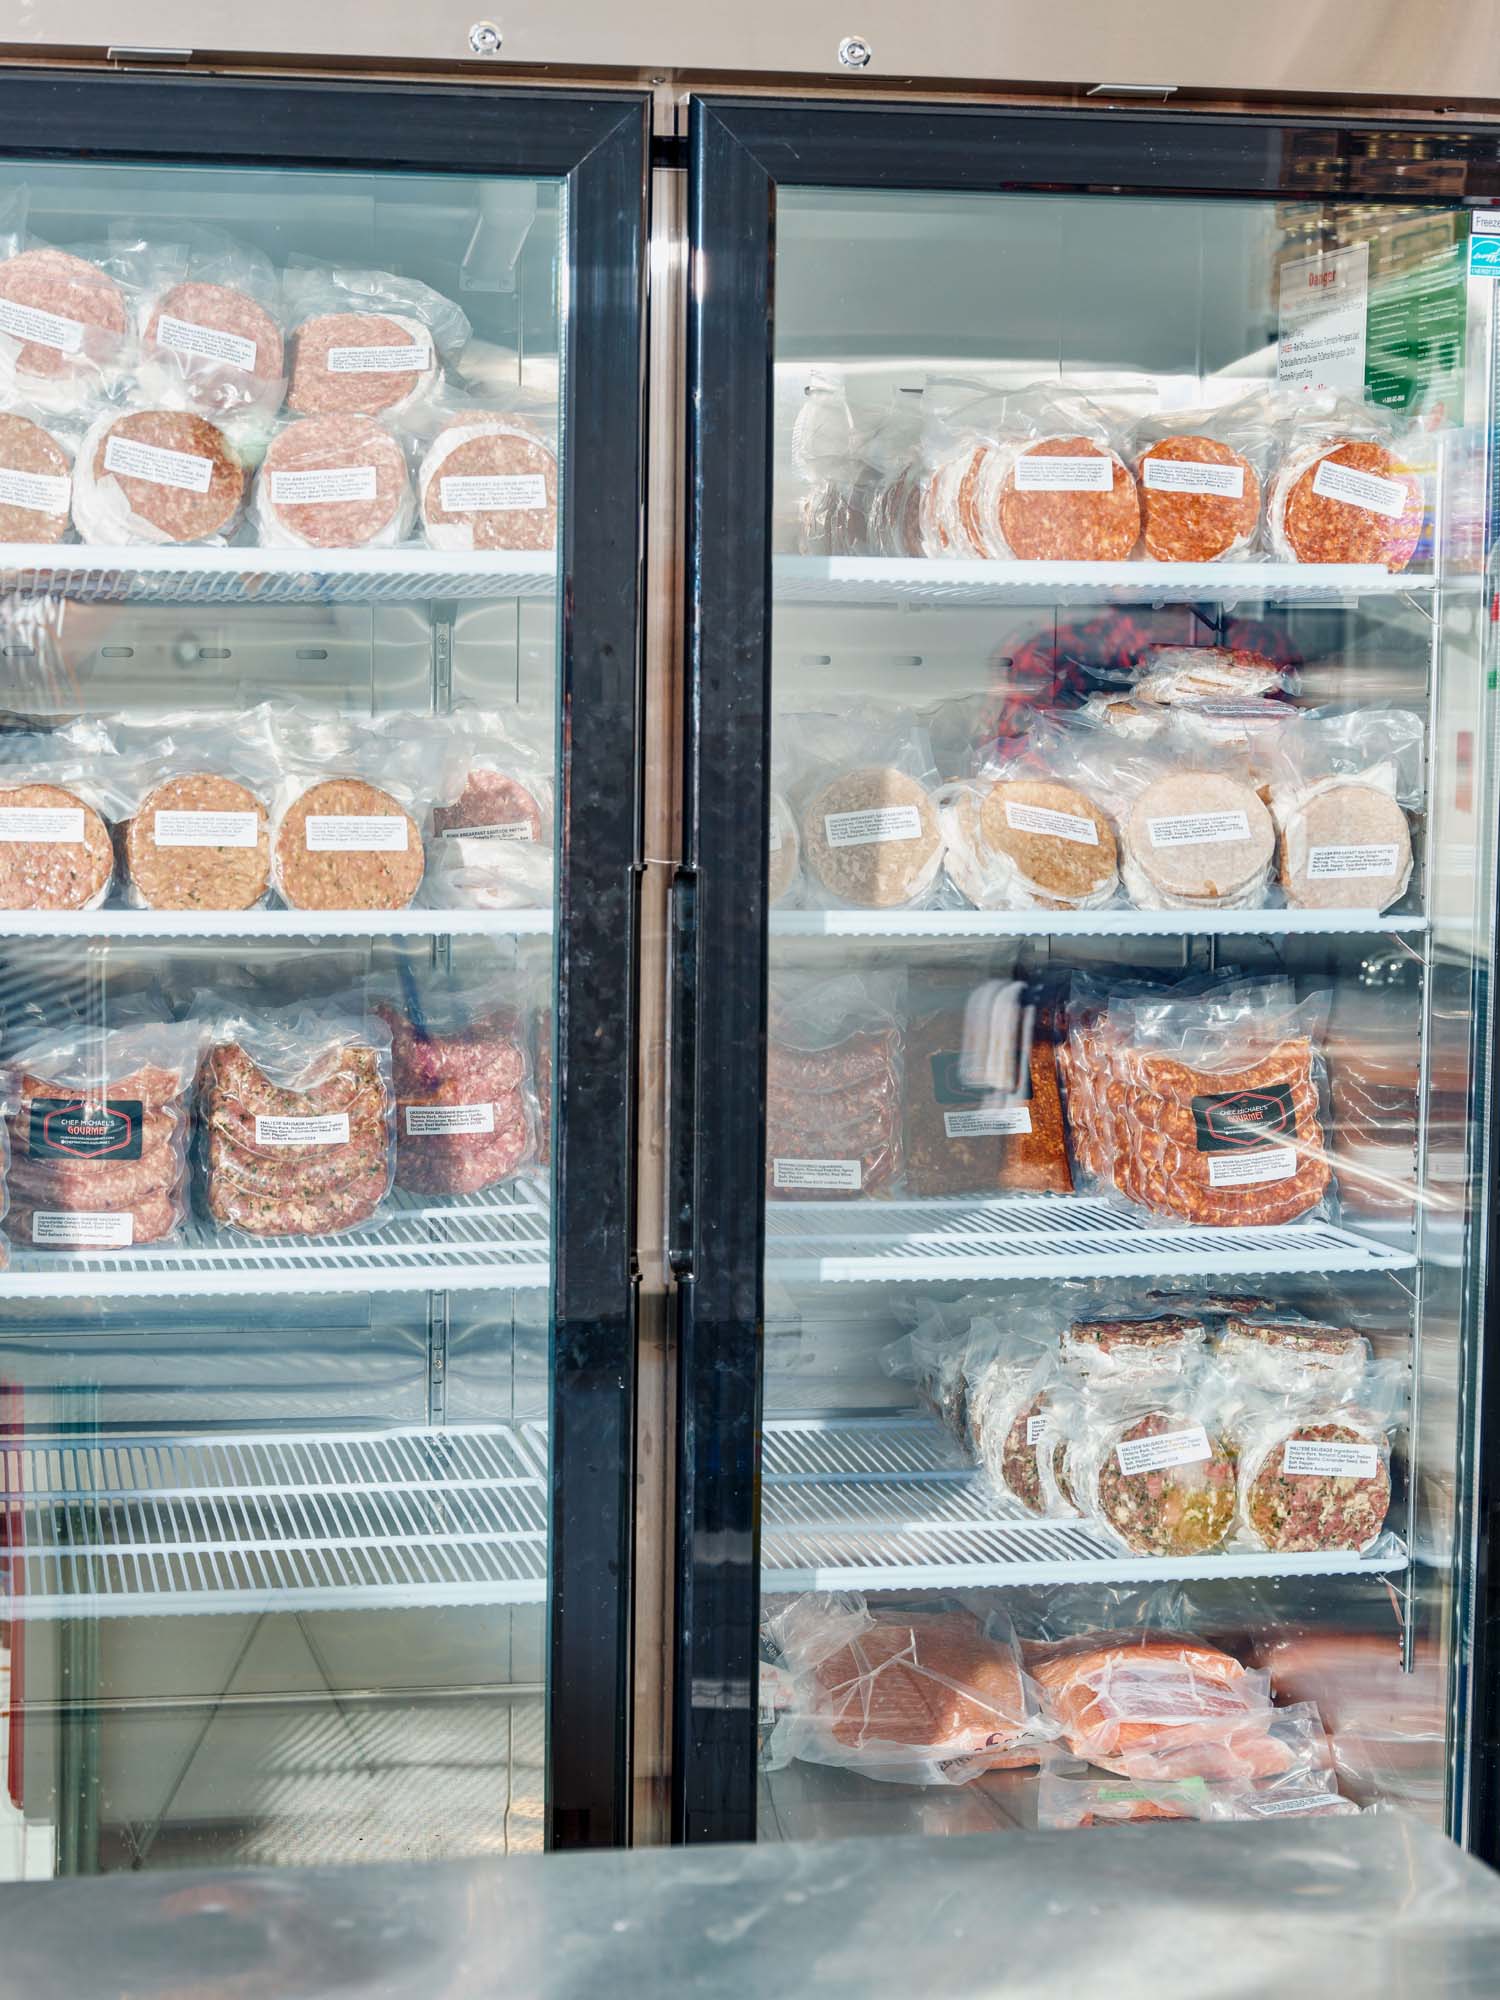 A freezer full of house-made burgers and sausages